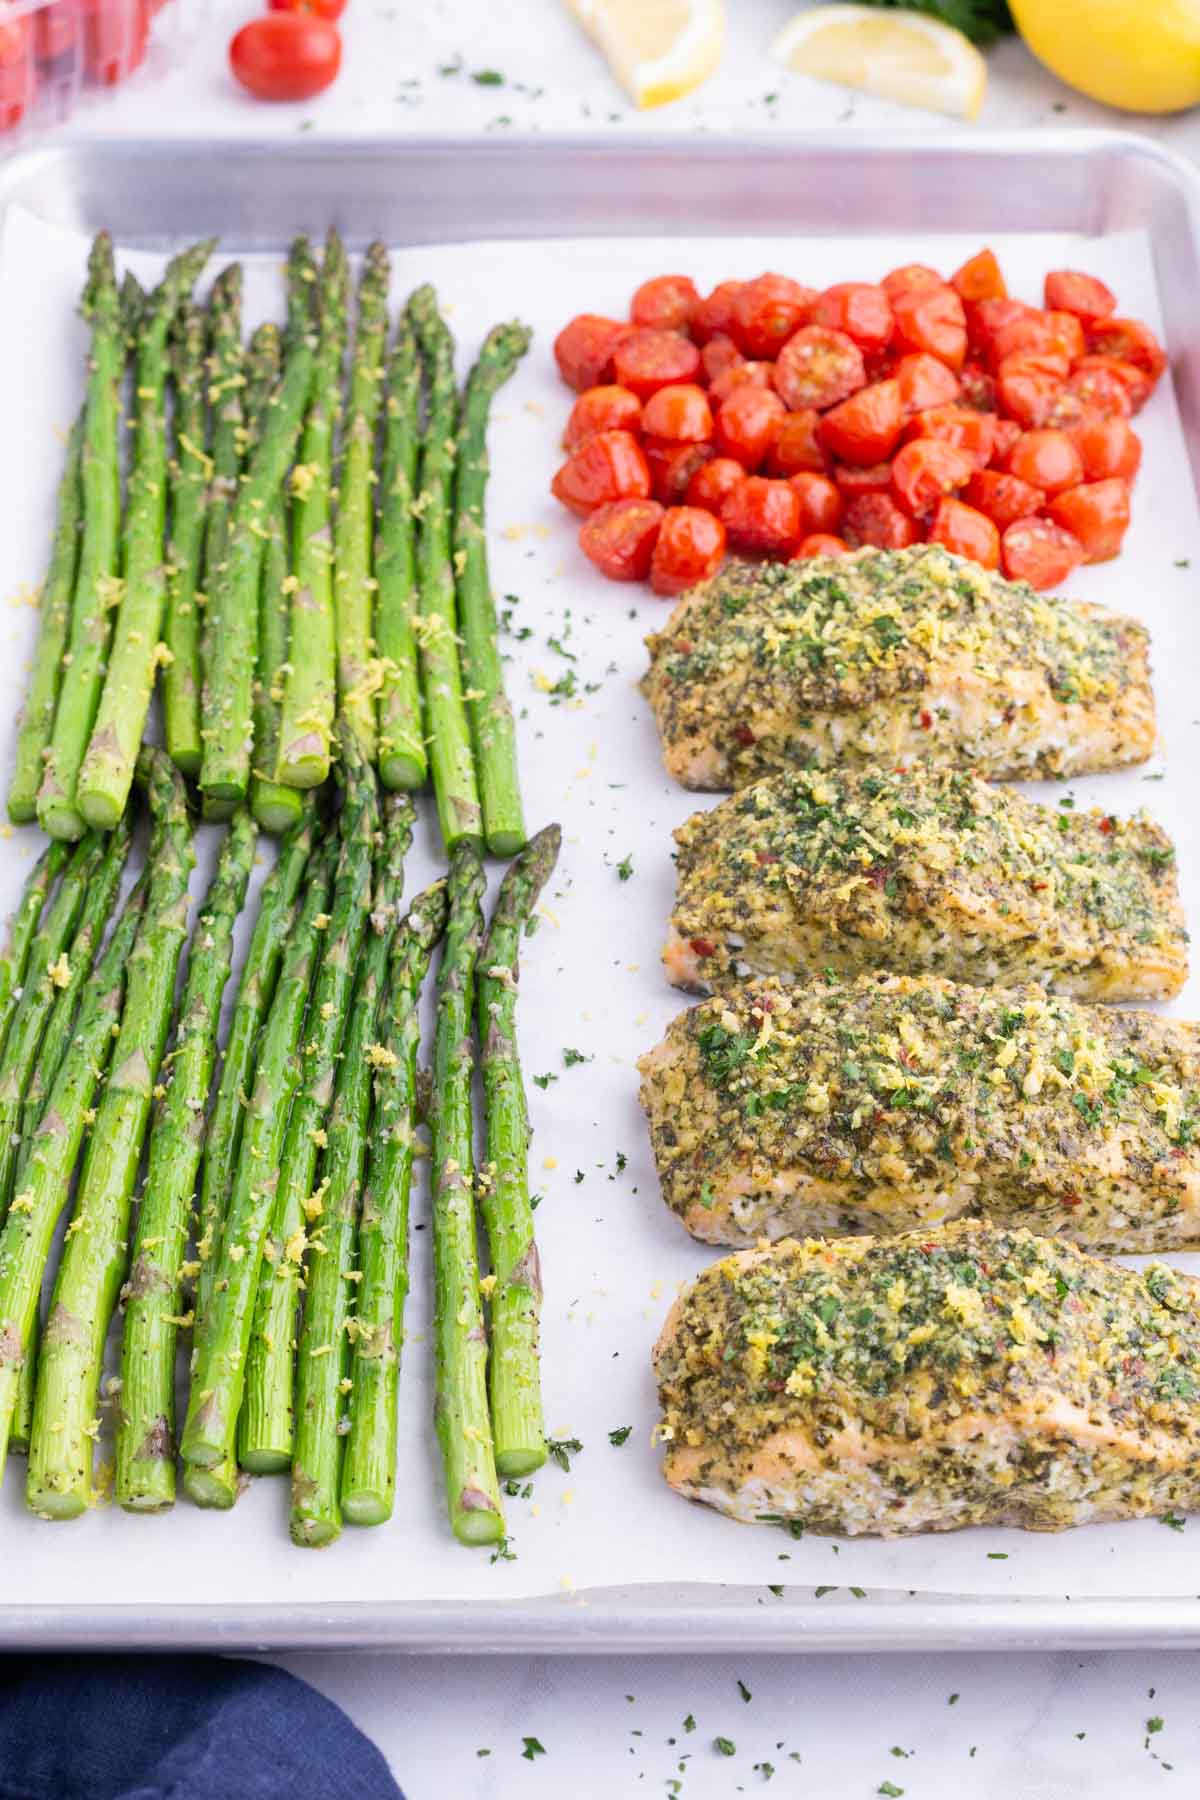 Asparagus, salmon, and tomatoes are baked on a tray in the oven.